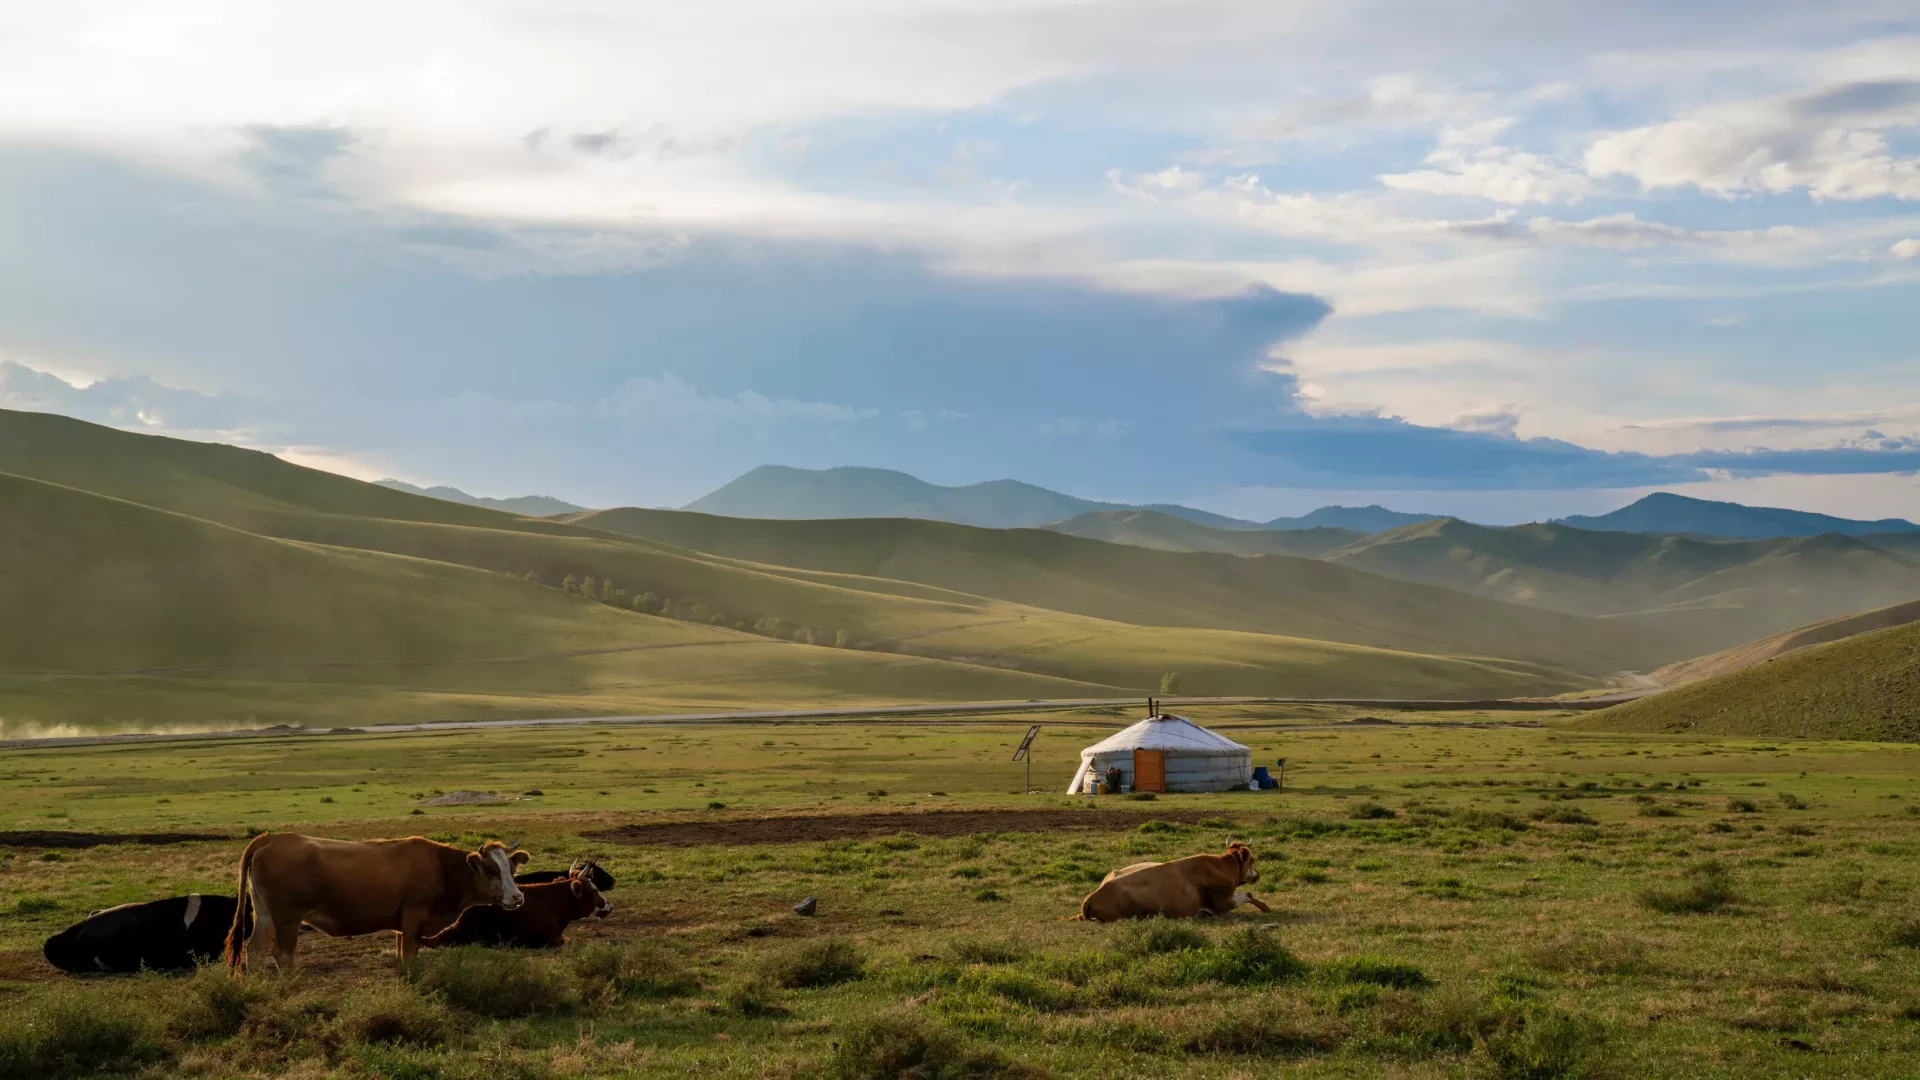 Music and life in Mongolia